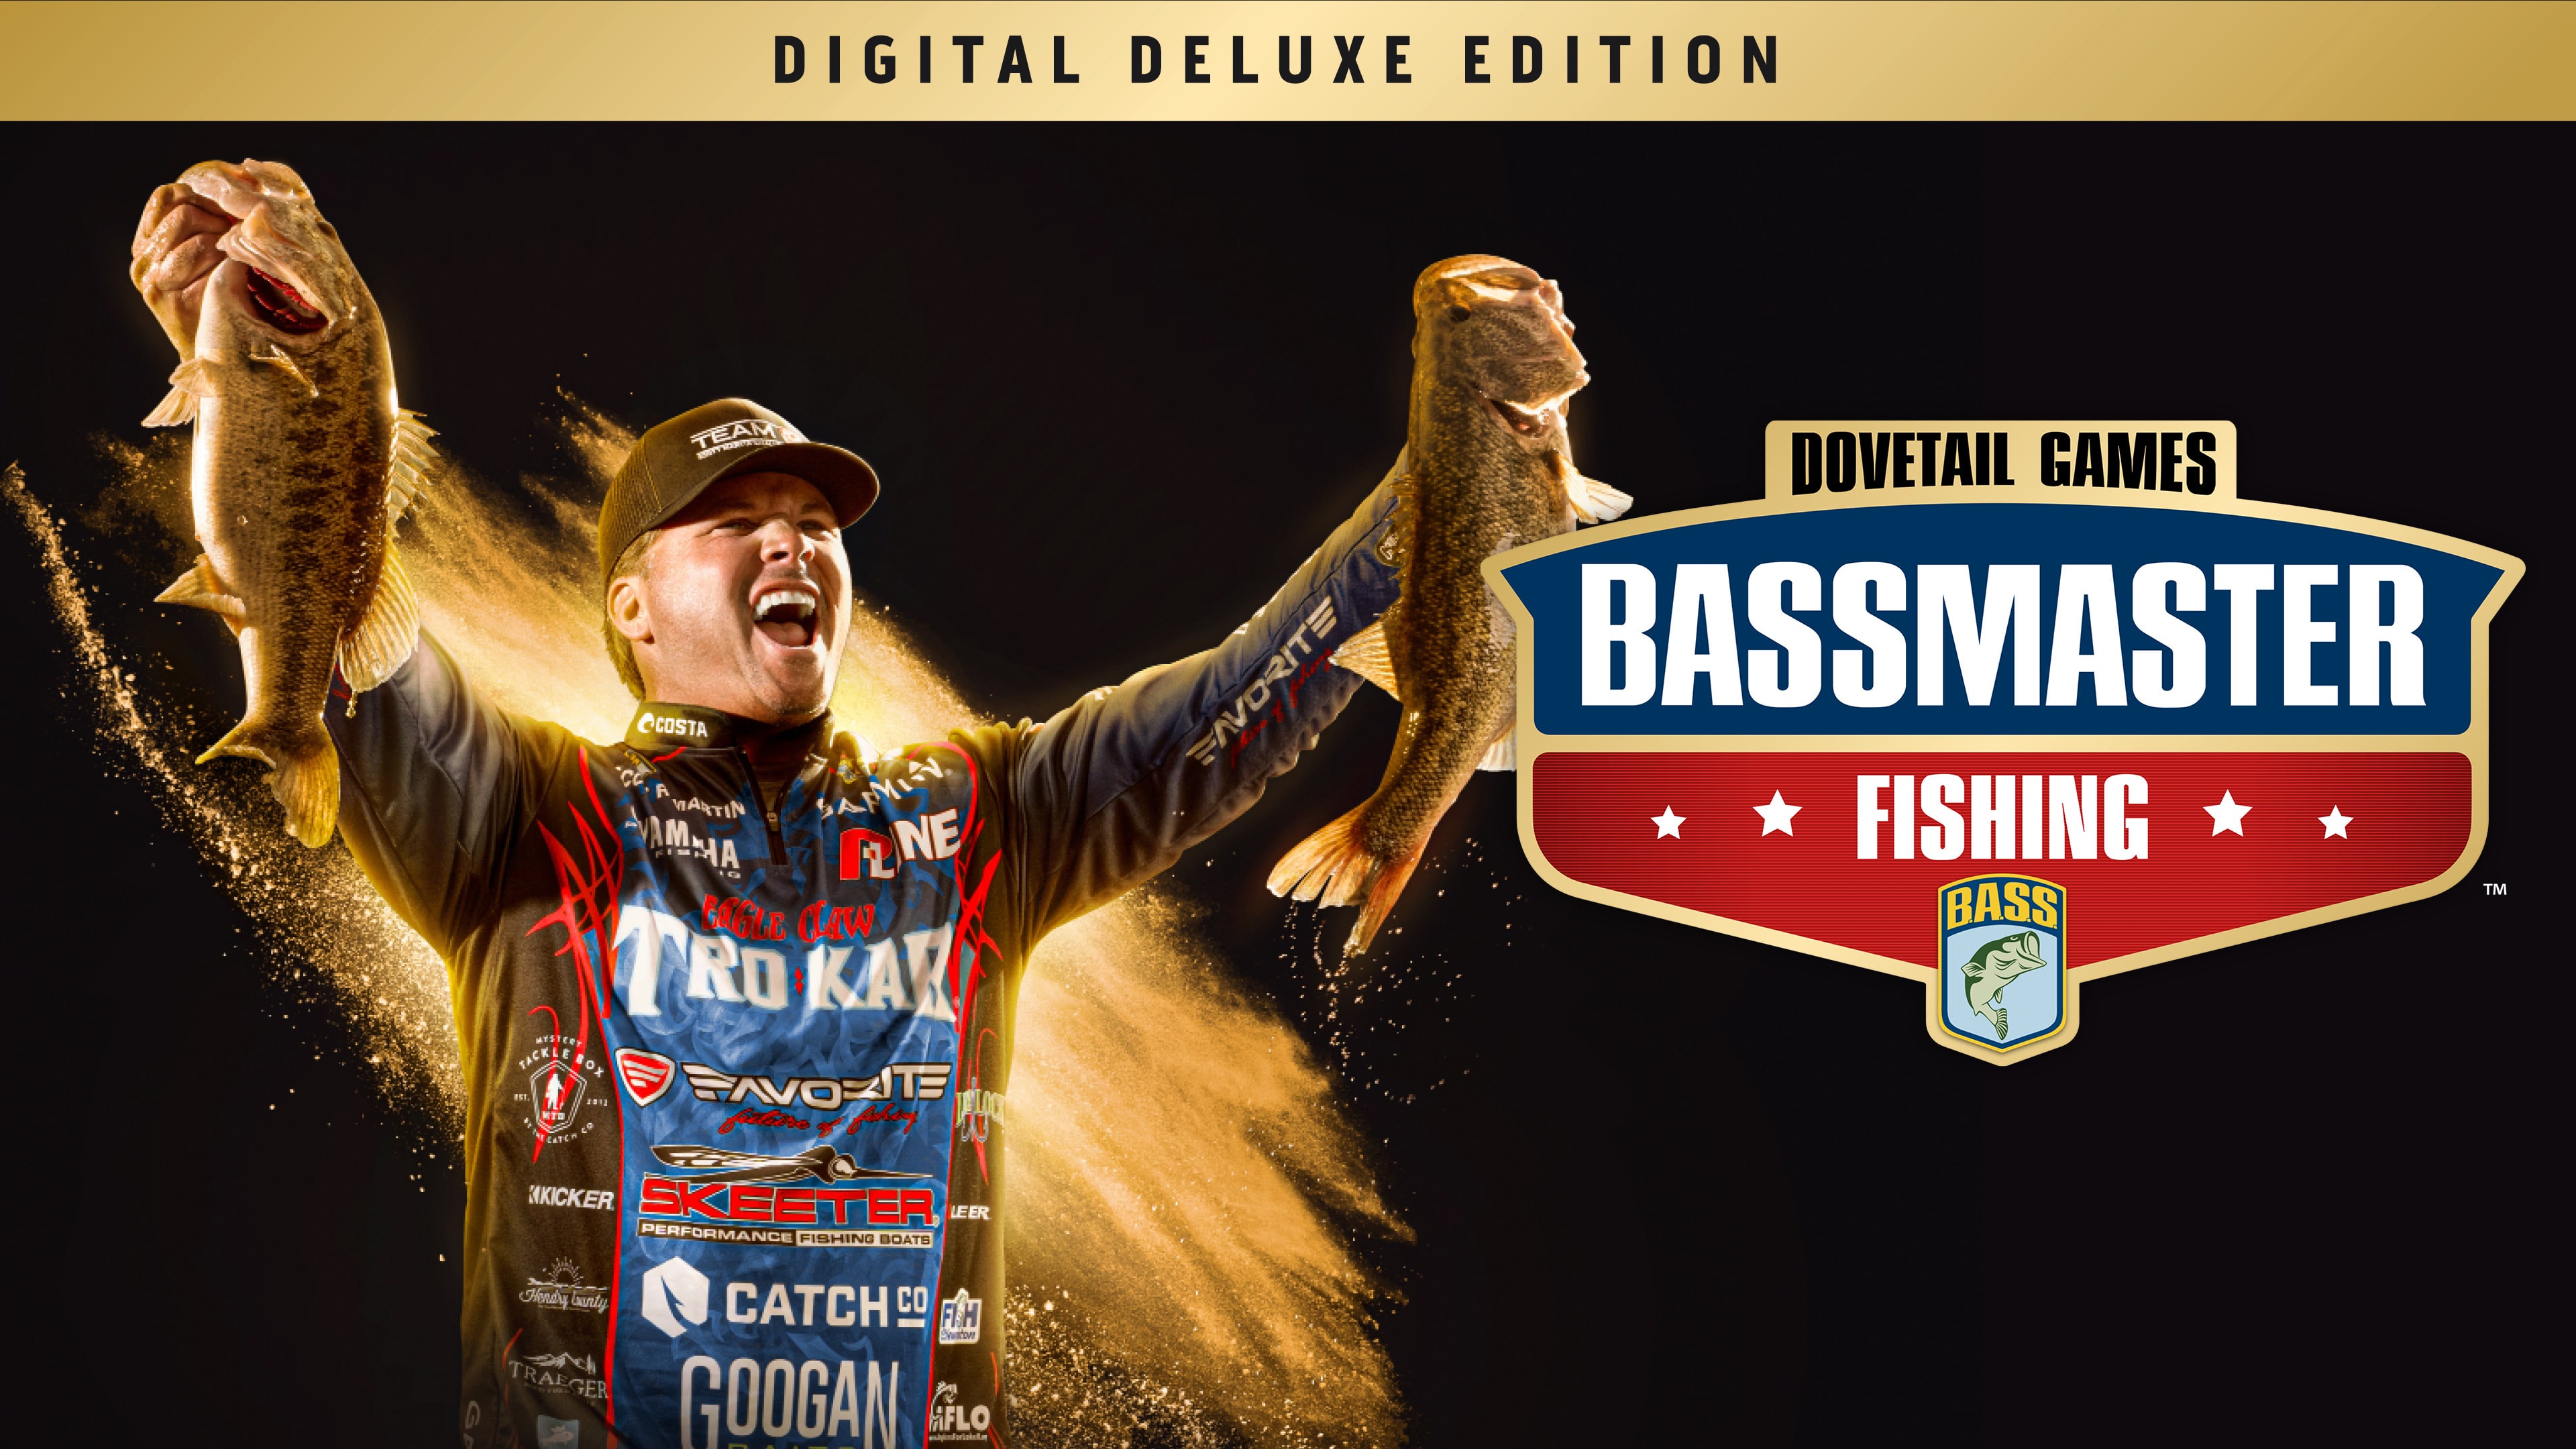 Bassmaster® Fishing: Deluxe Edition PS4™ and PS5™ (日语, 简体中文, 英语)